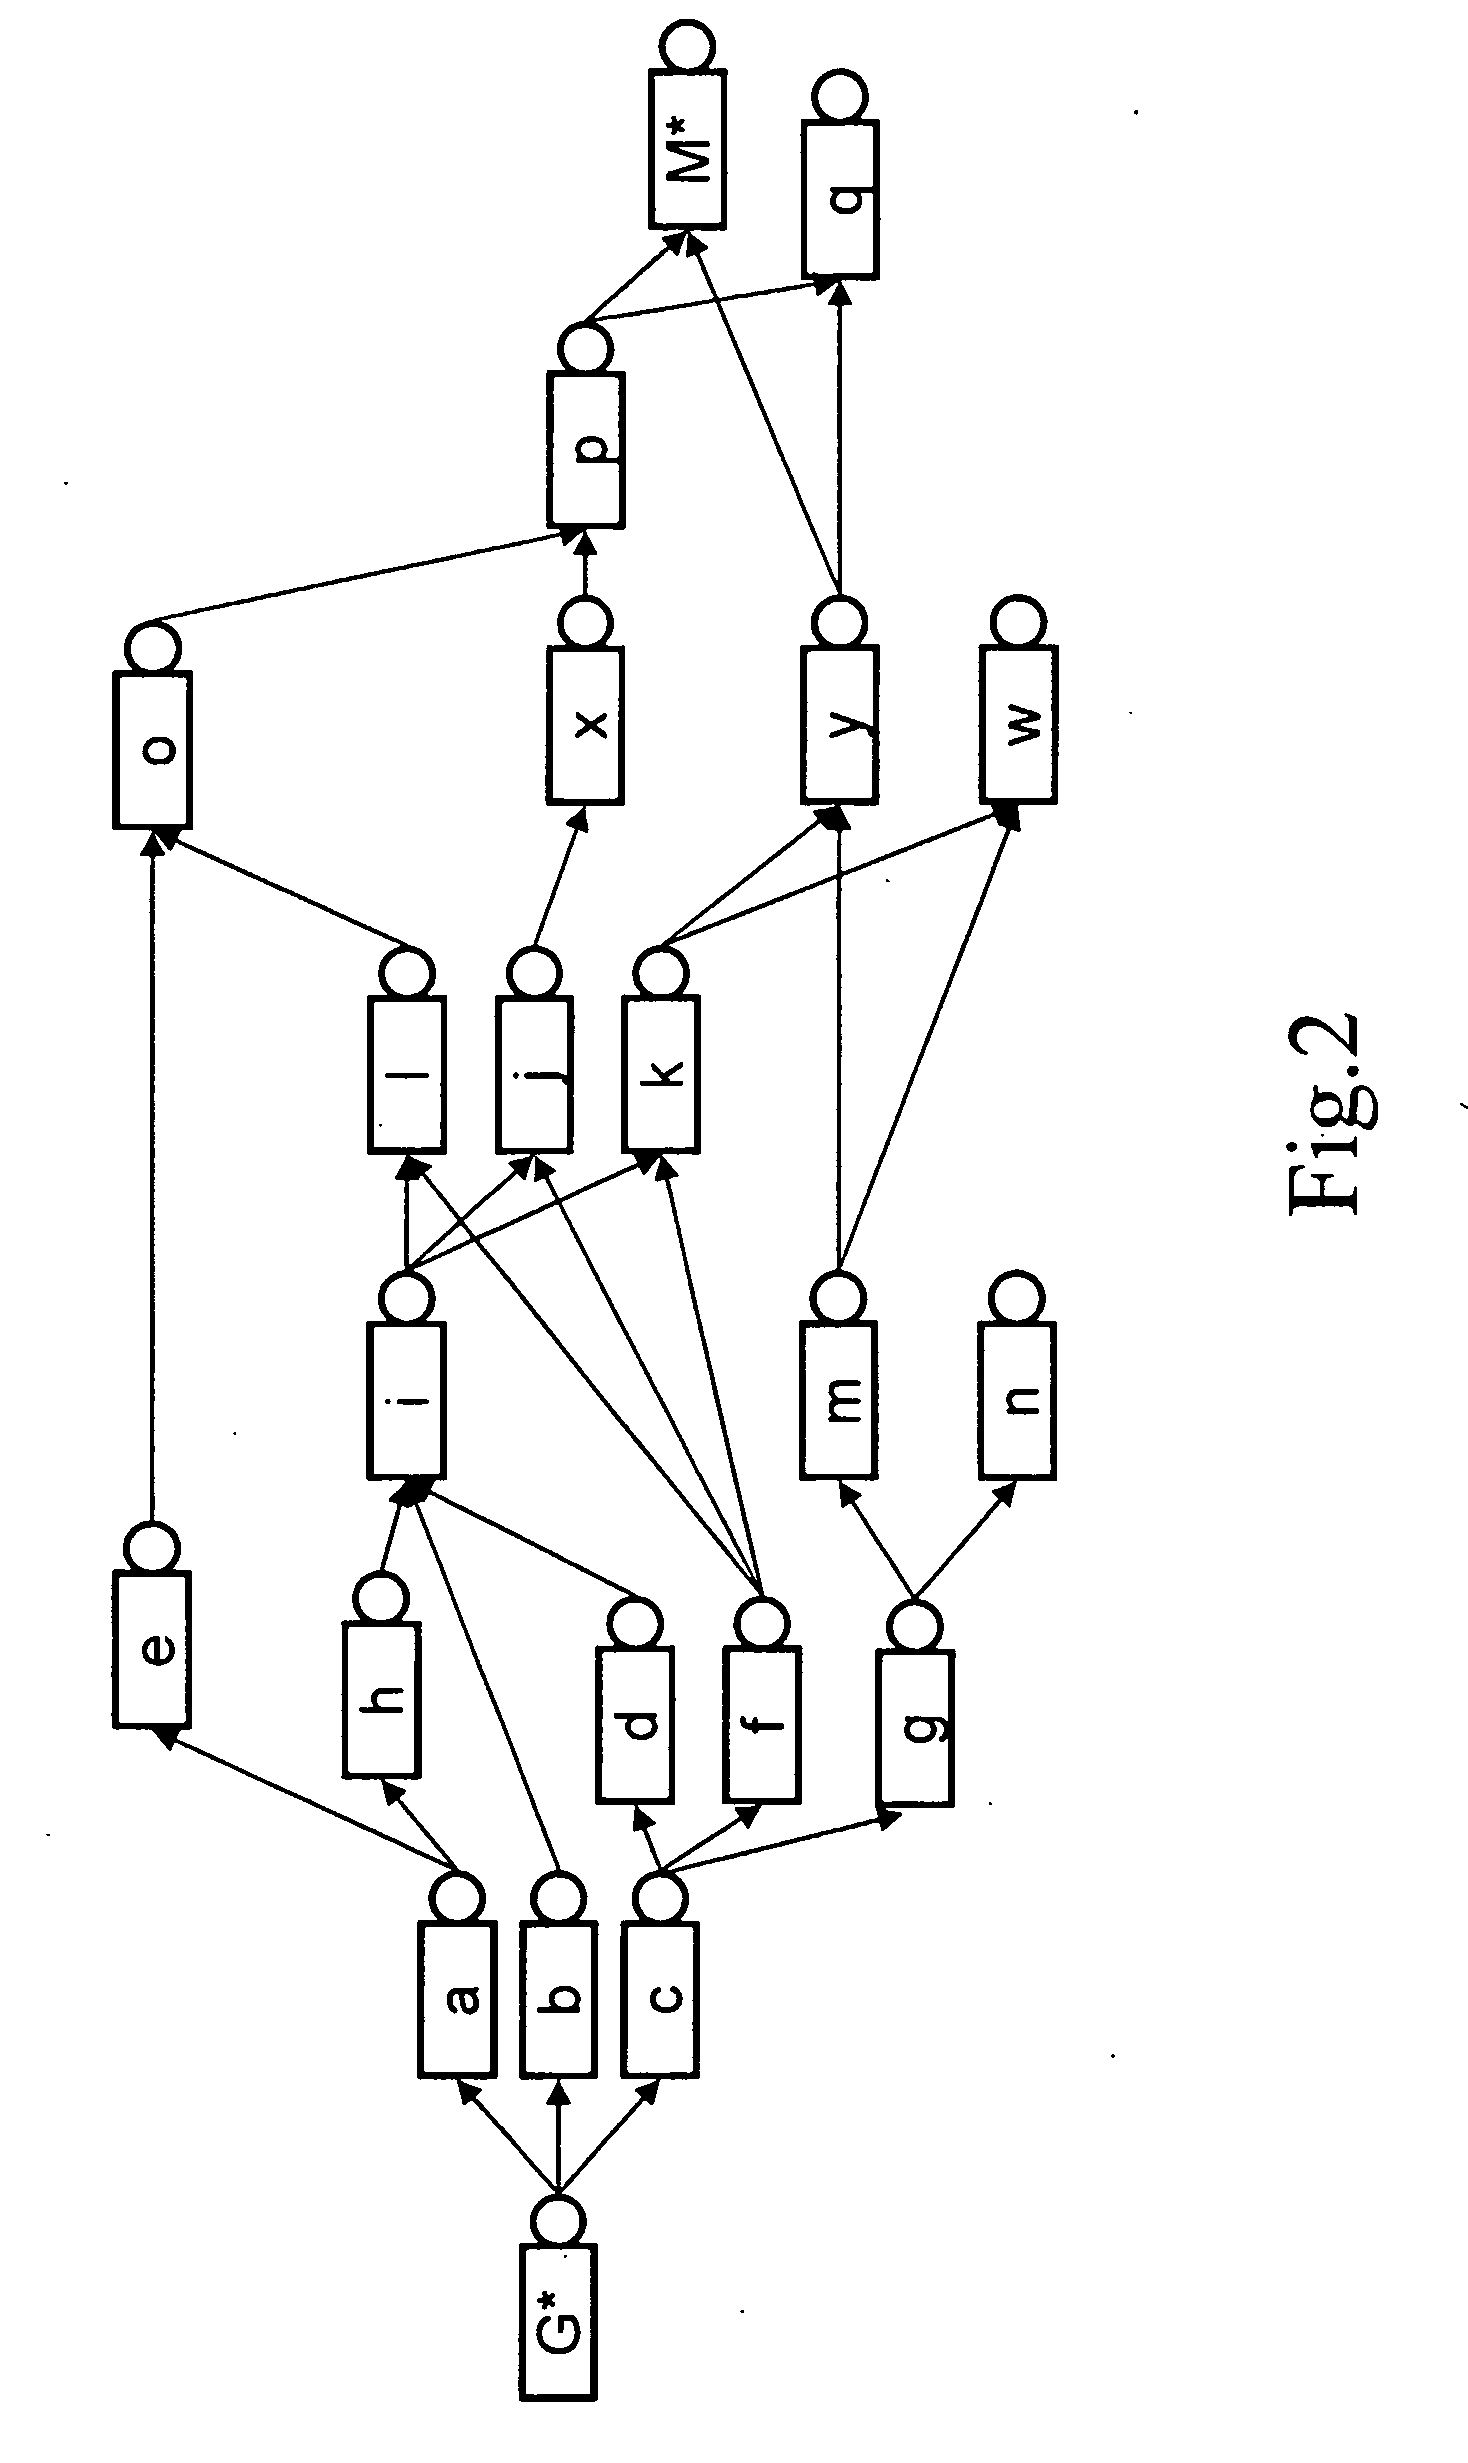 Method for Configuring an Optical Network